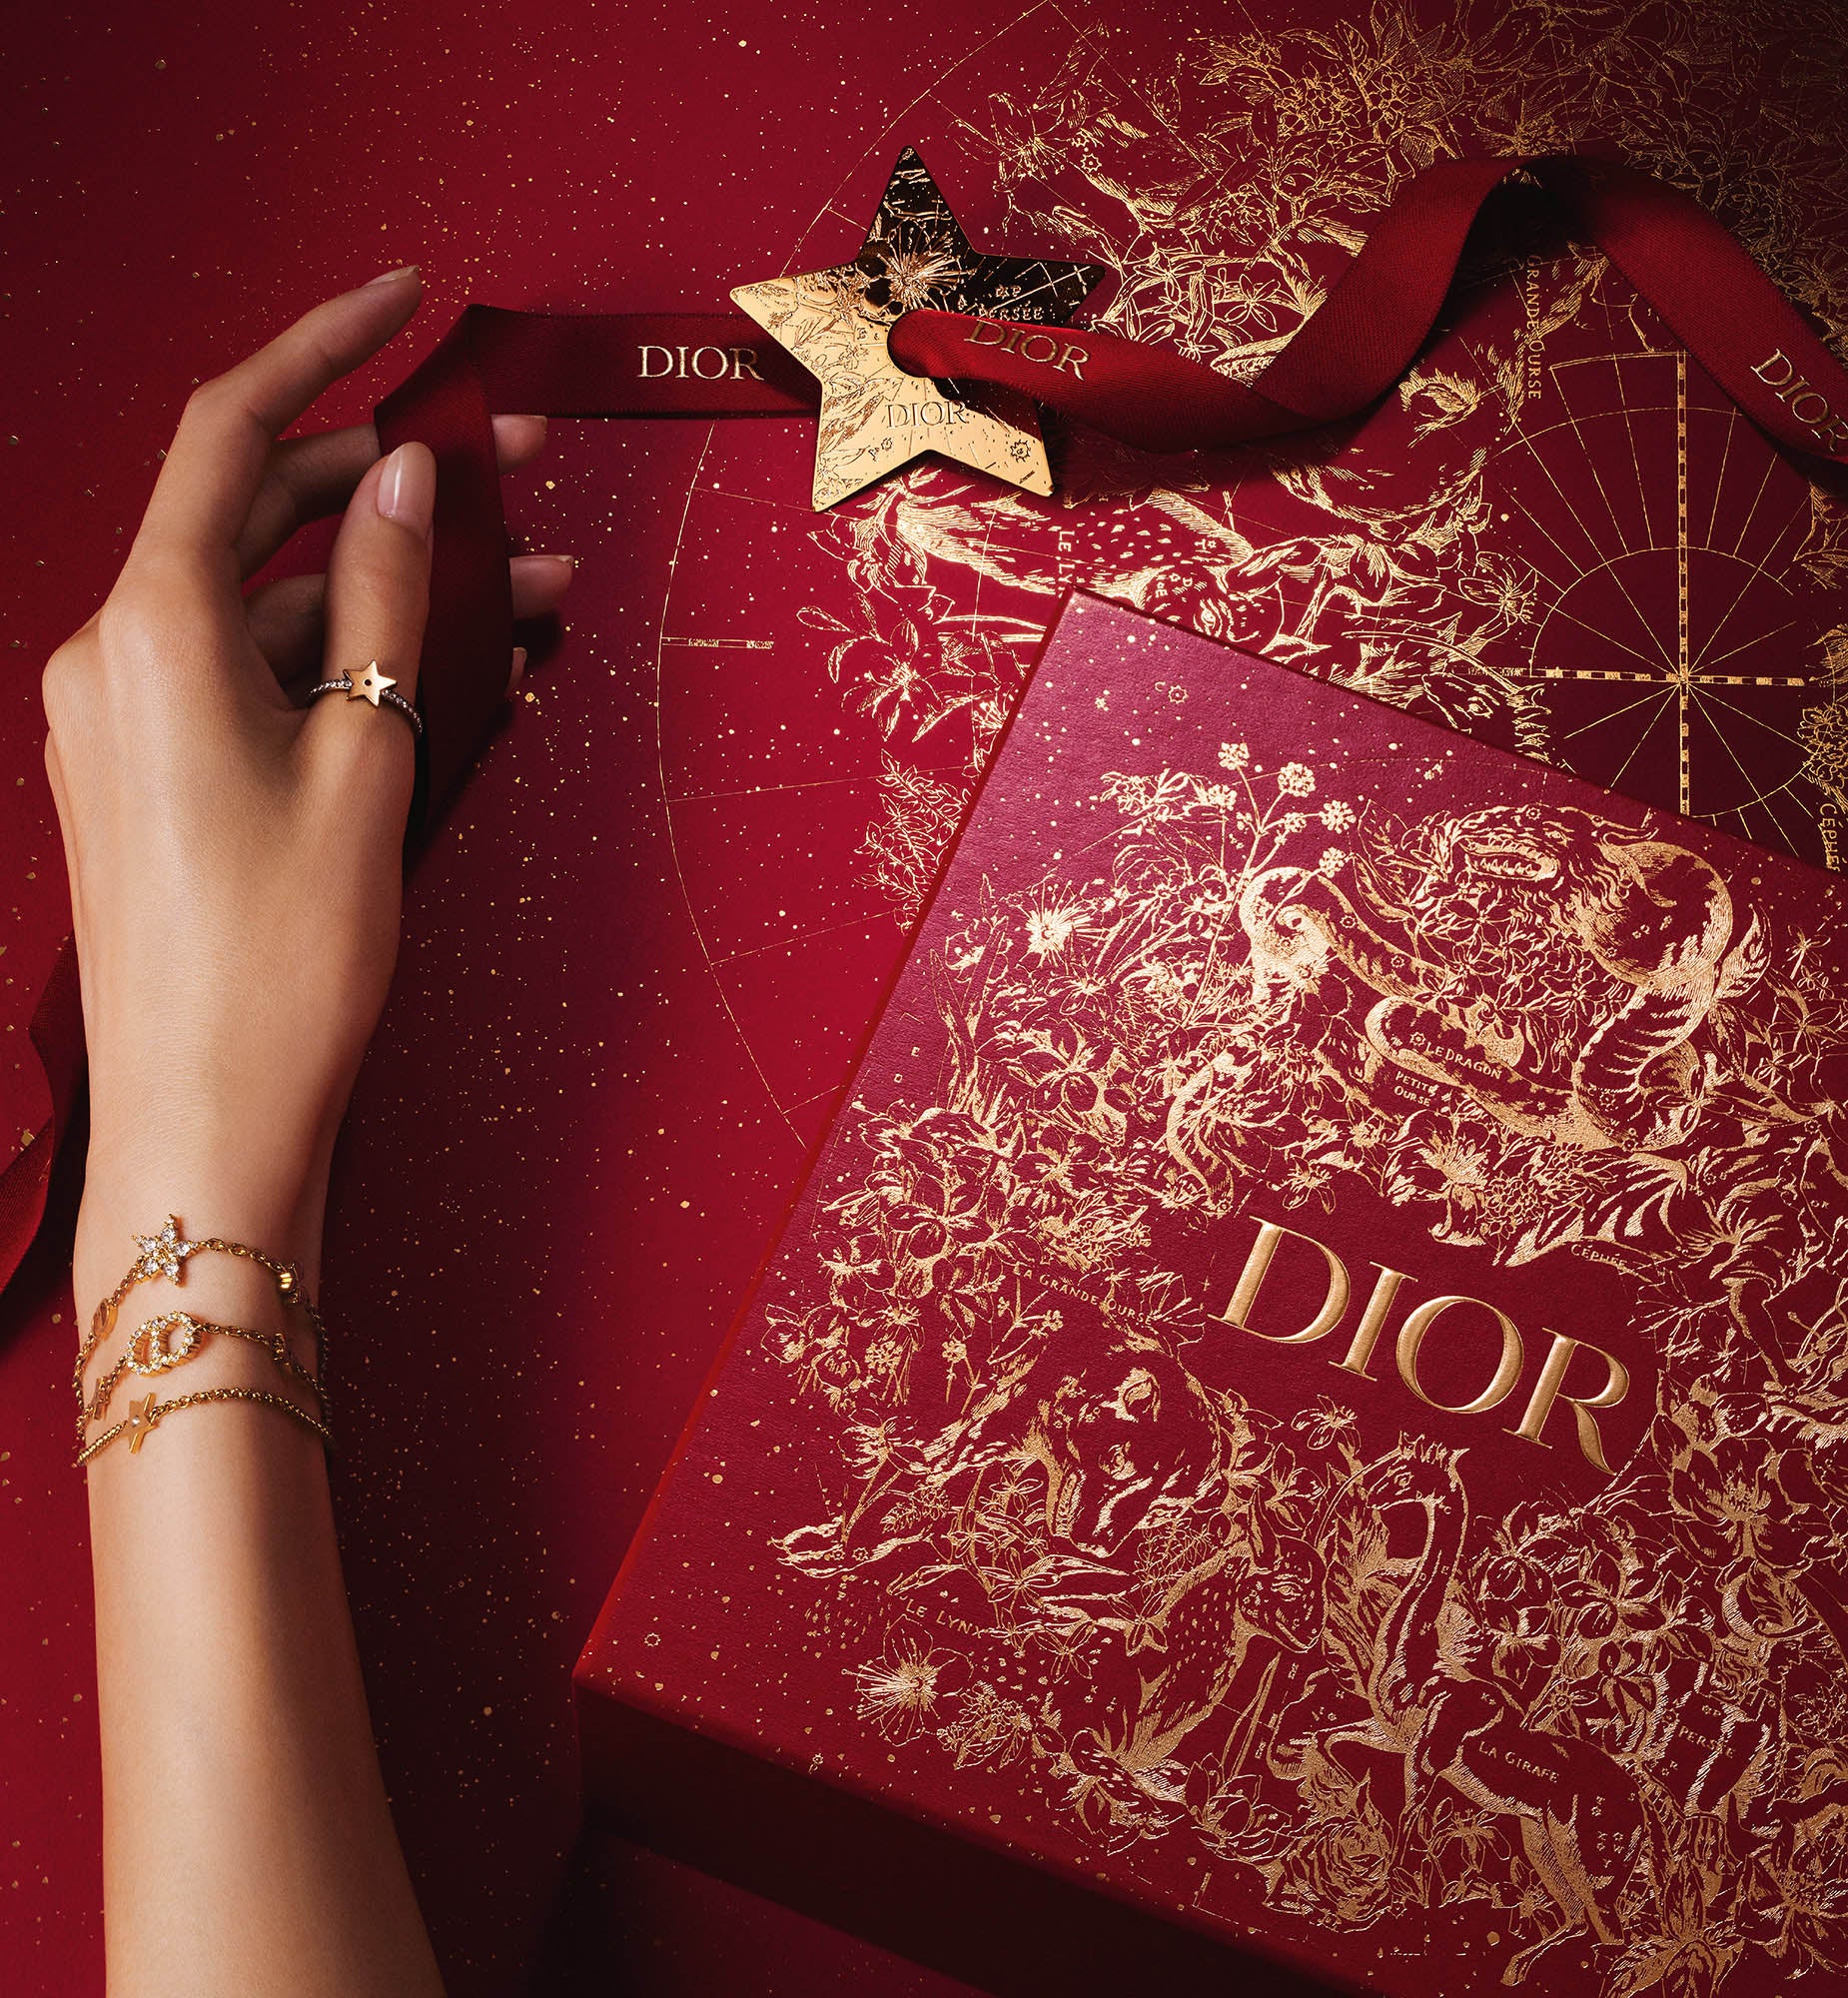 Dior - Chinese New Year 2021 3D Animations  Chinese new year gifts, Dior, Chinese  new year